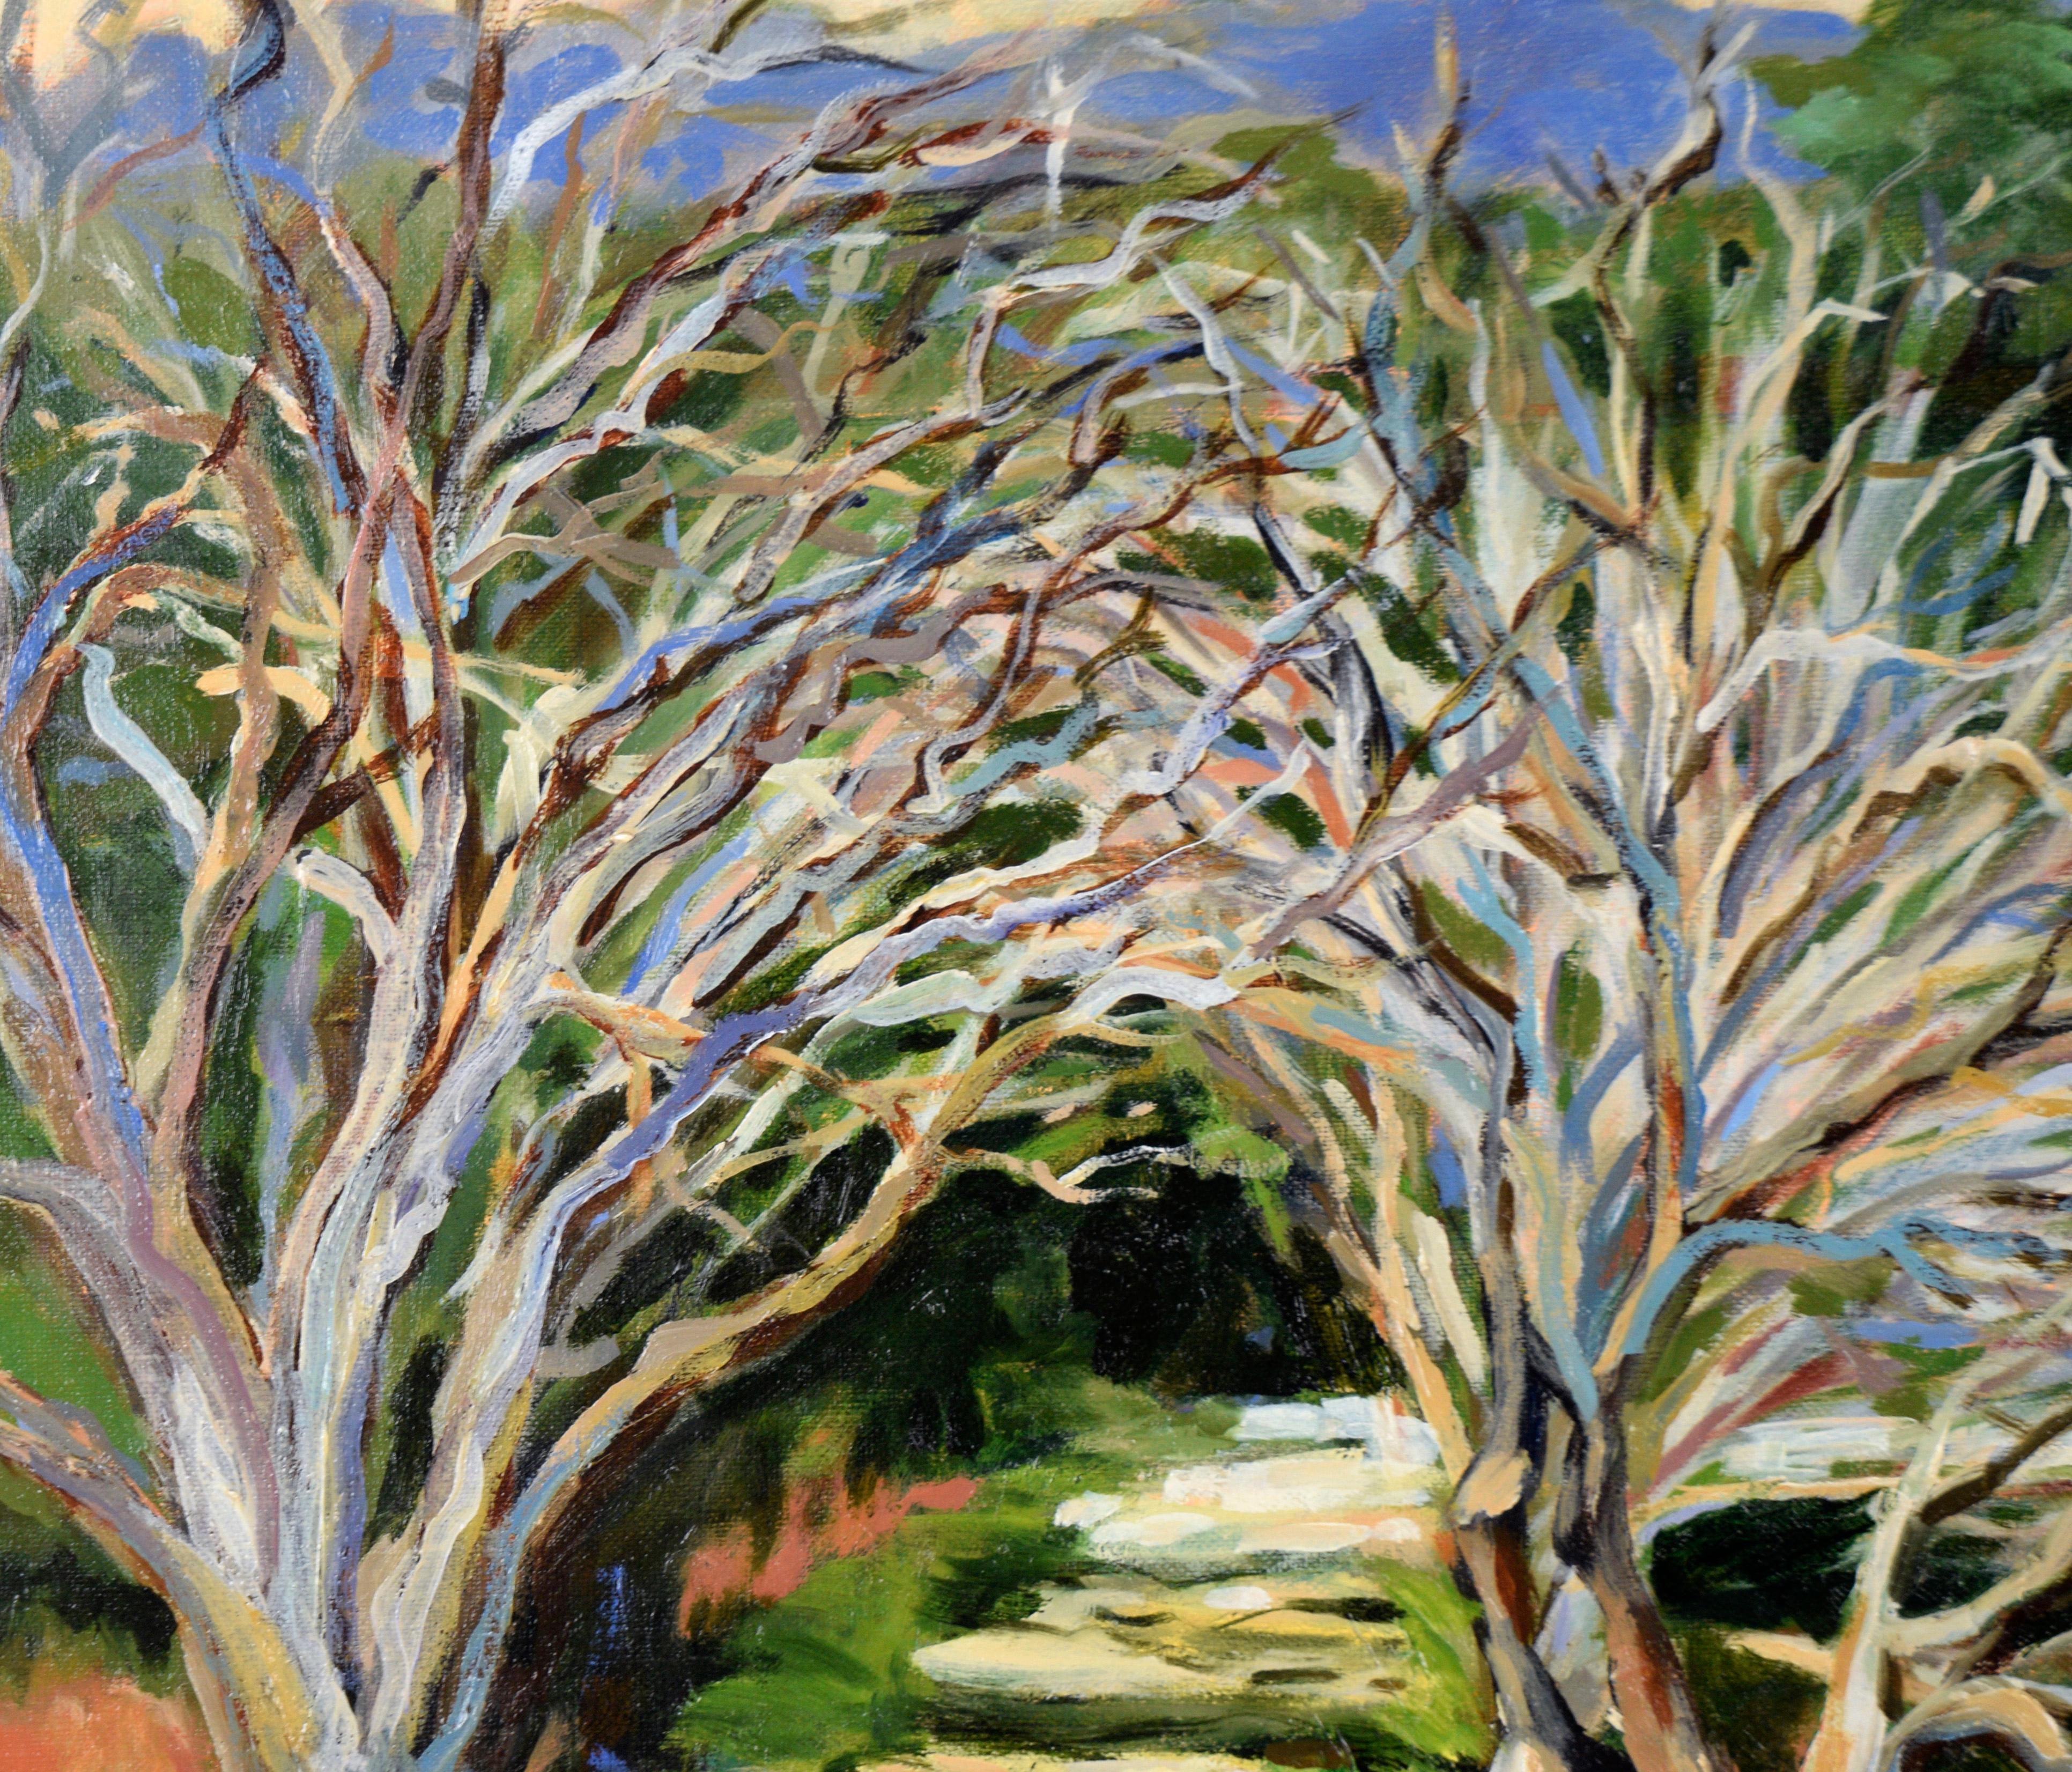 Shaded Path in the California Hills - Original Oil on Canvas (Laid on Board) - Contemporary Painting by Nancy Faisant